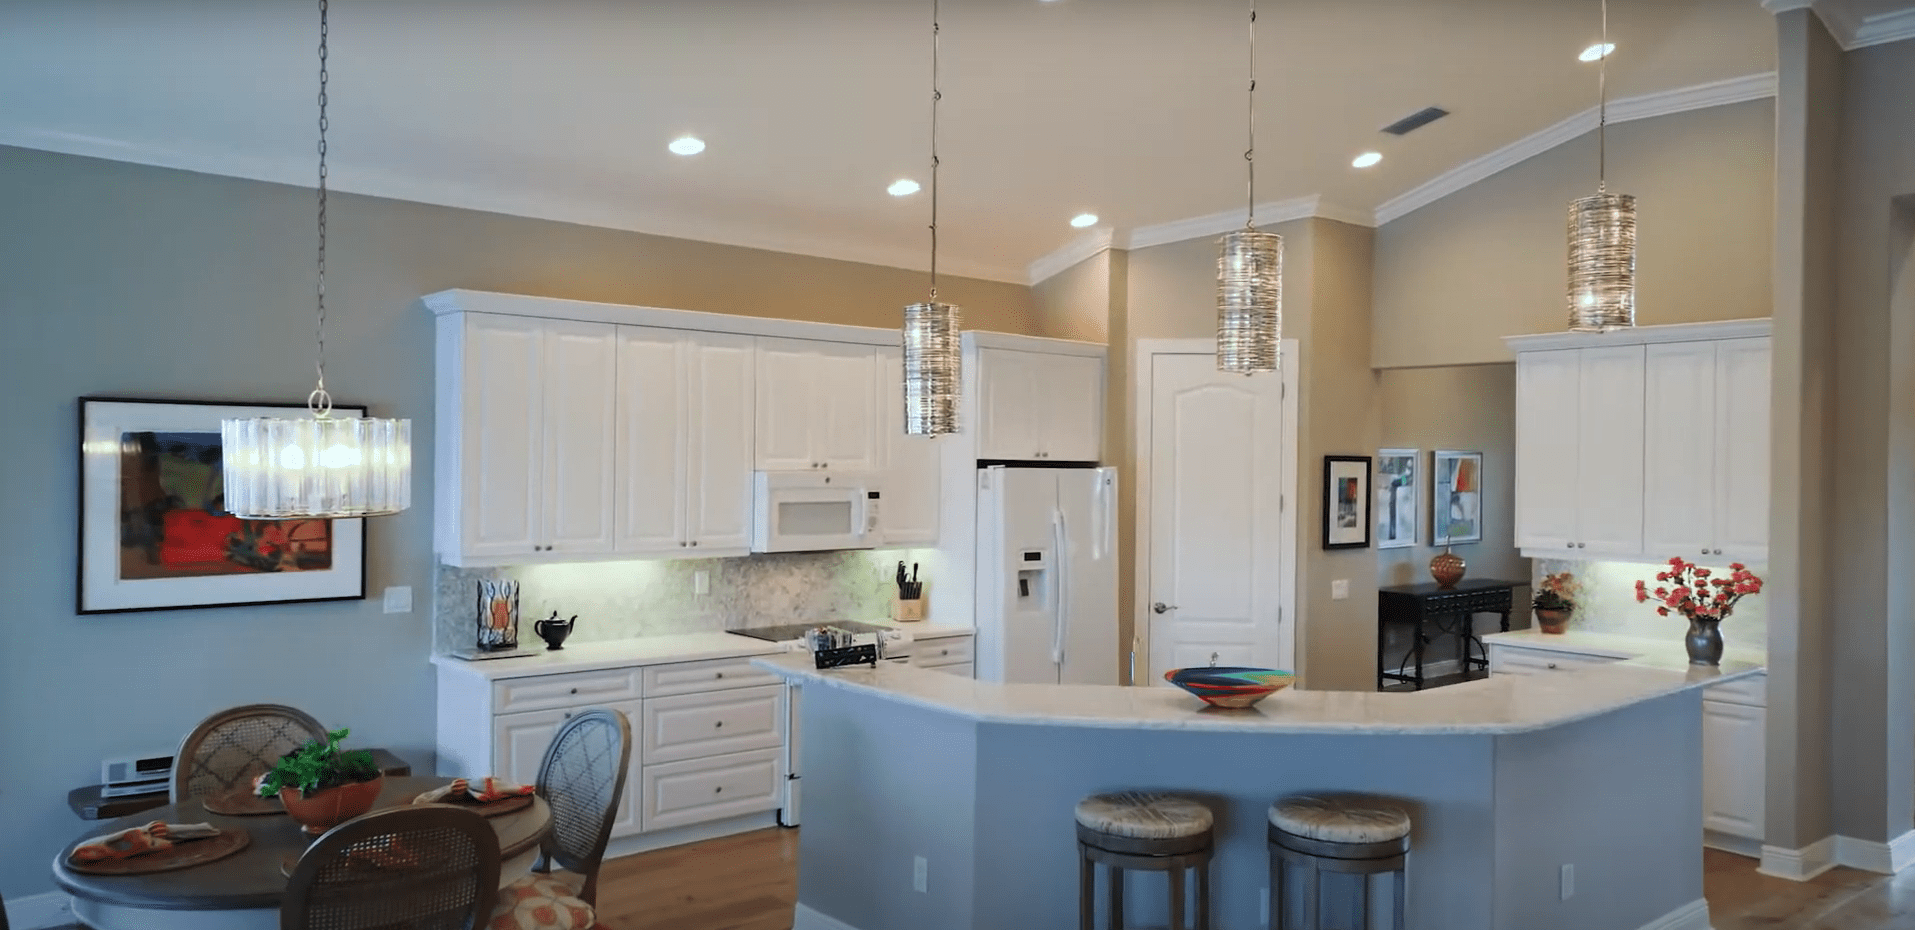 The kitchen in the Boca Grande model home at Shell Point Retirement Community